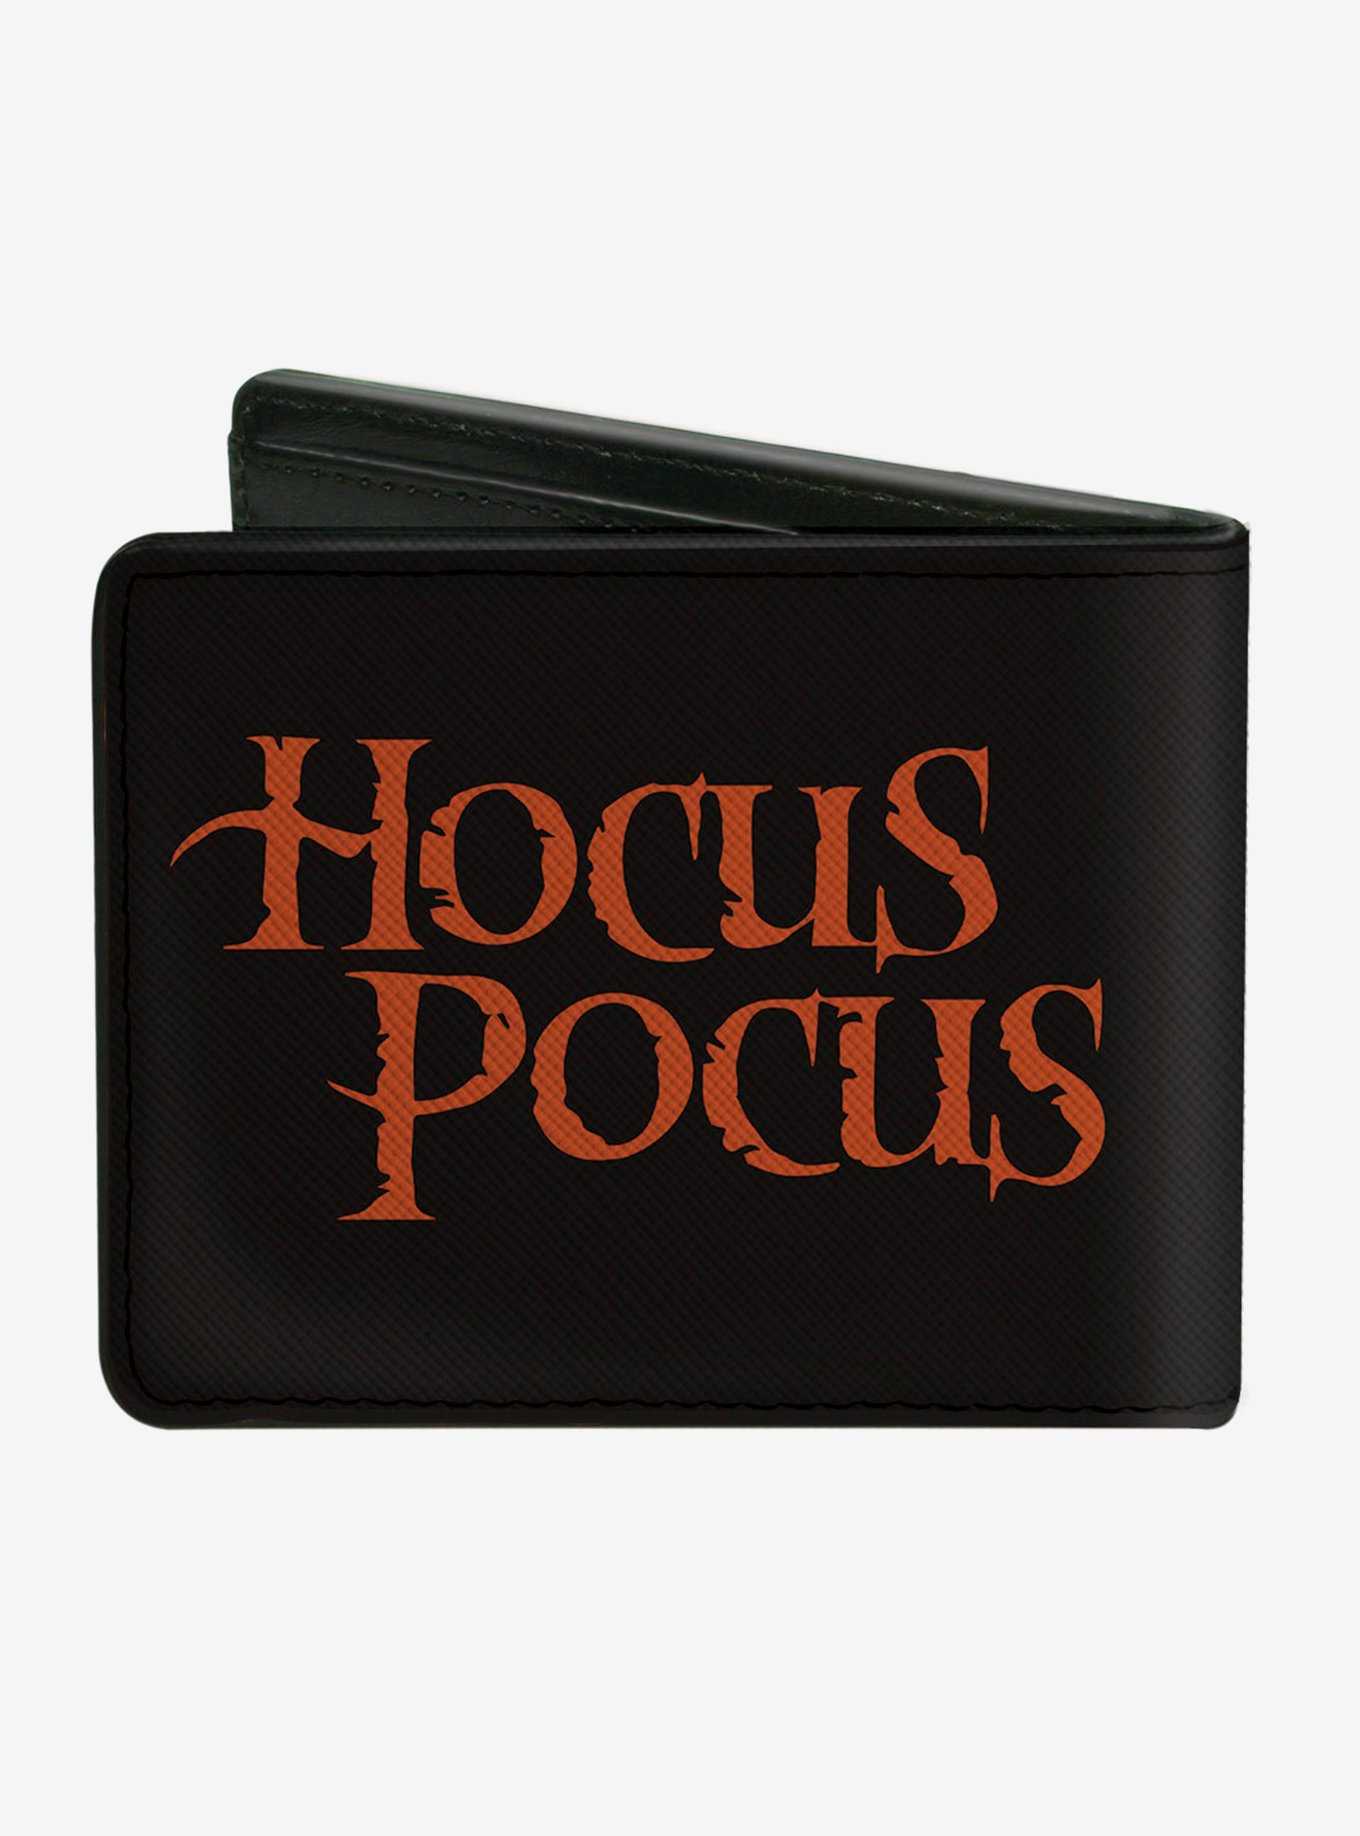 Disney Hocus Pocus I Shall Always Be With You Bifold Wallet, , hi-res